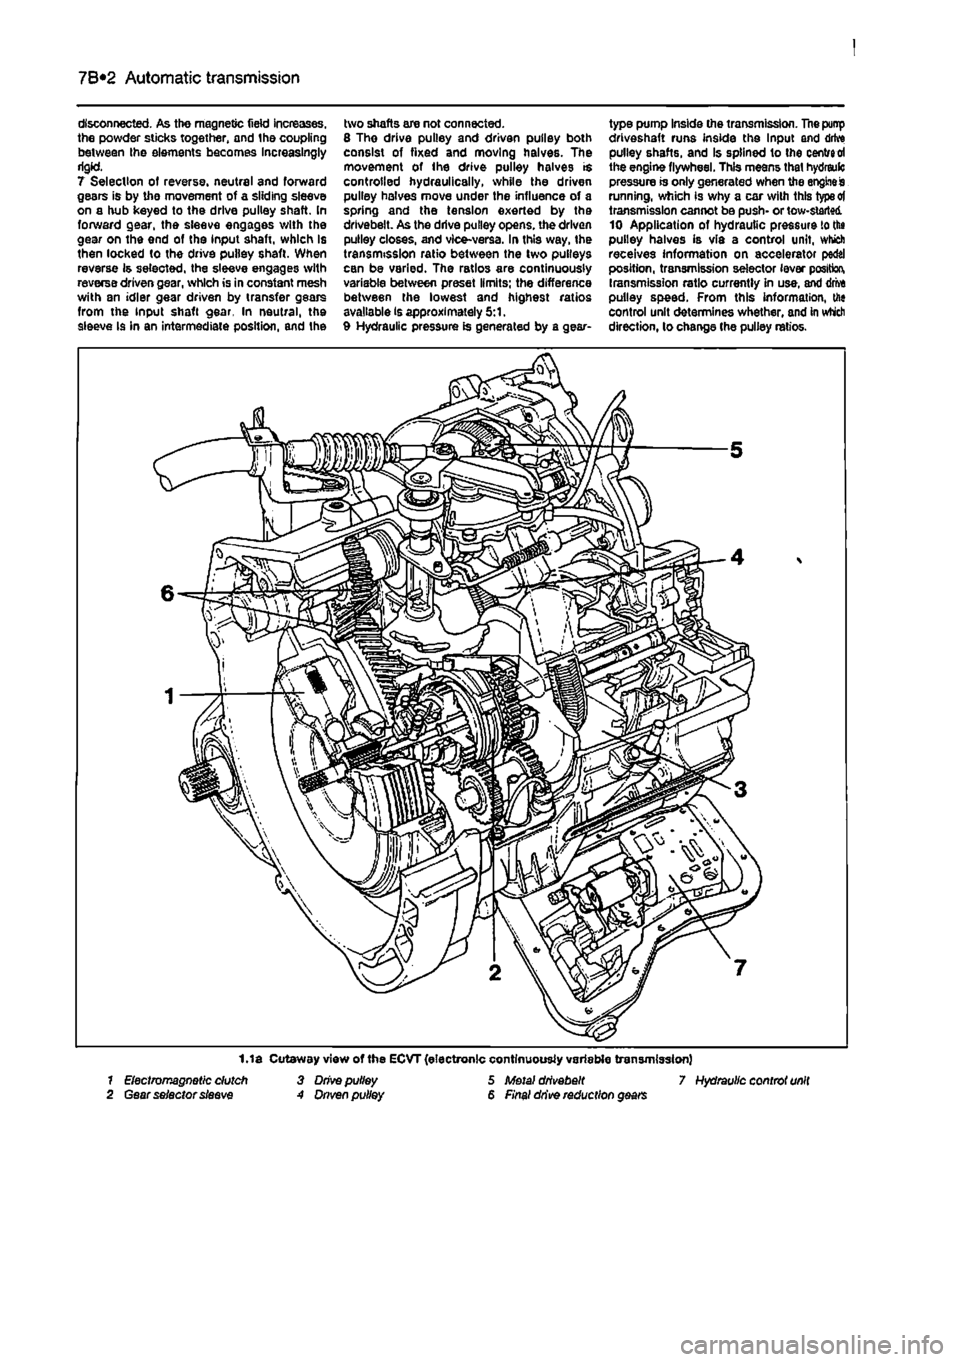 FIAT PUNTO 1995 176 / 1.G Workshop Manual 
7B*2 Automatic transmission 
disconnected. As the magnetic field increases, the powder sticks together, and the coupling between Ihe elements becomes Increasingly rigid. 7 Selection of reverse, neutr